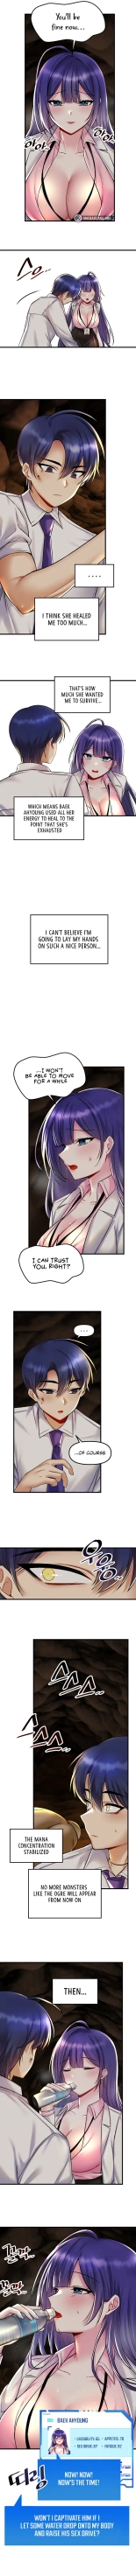 Trapped in the Academy's Eroge : page 247